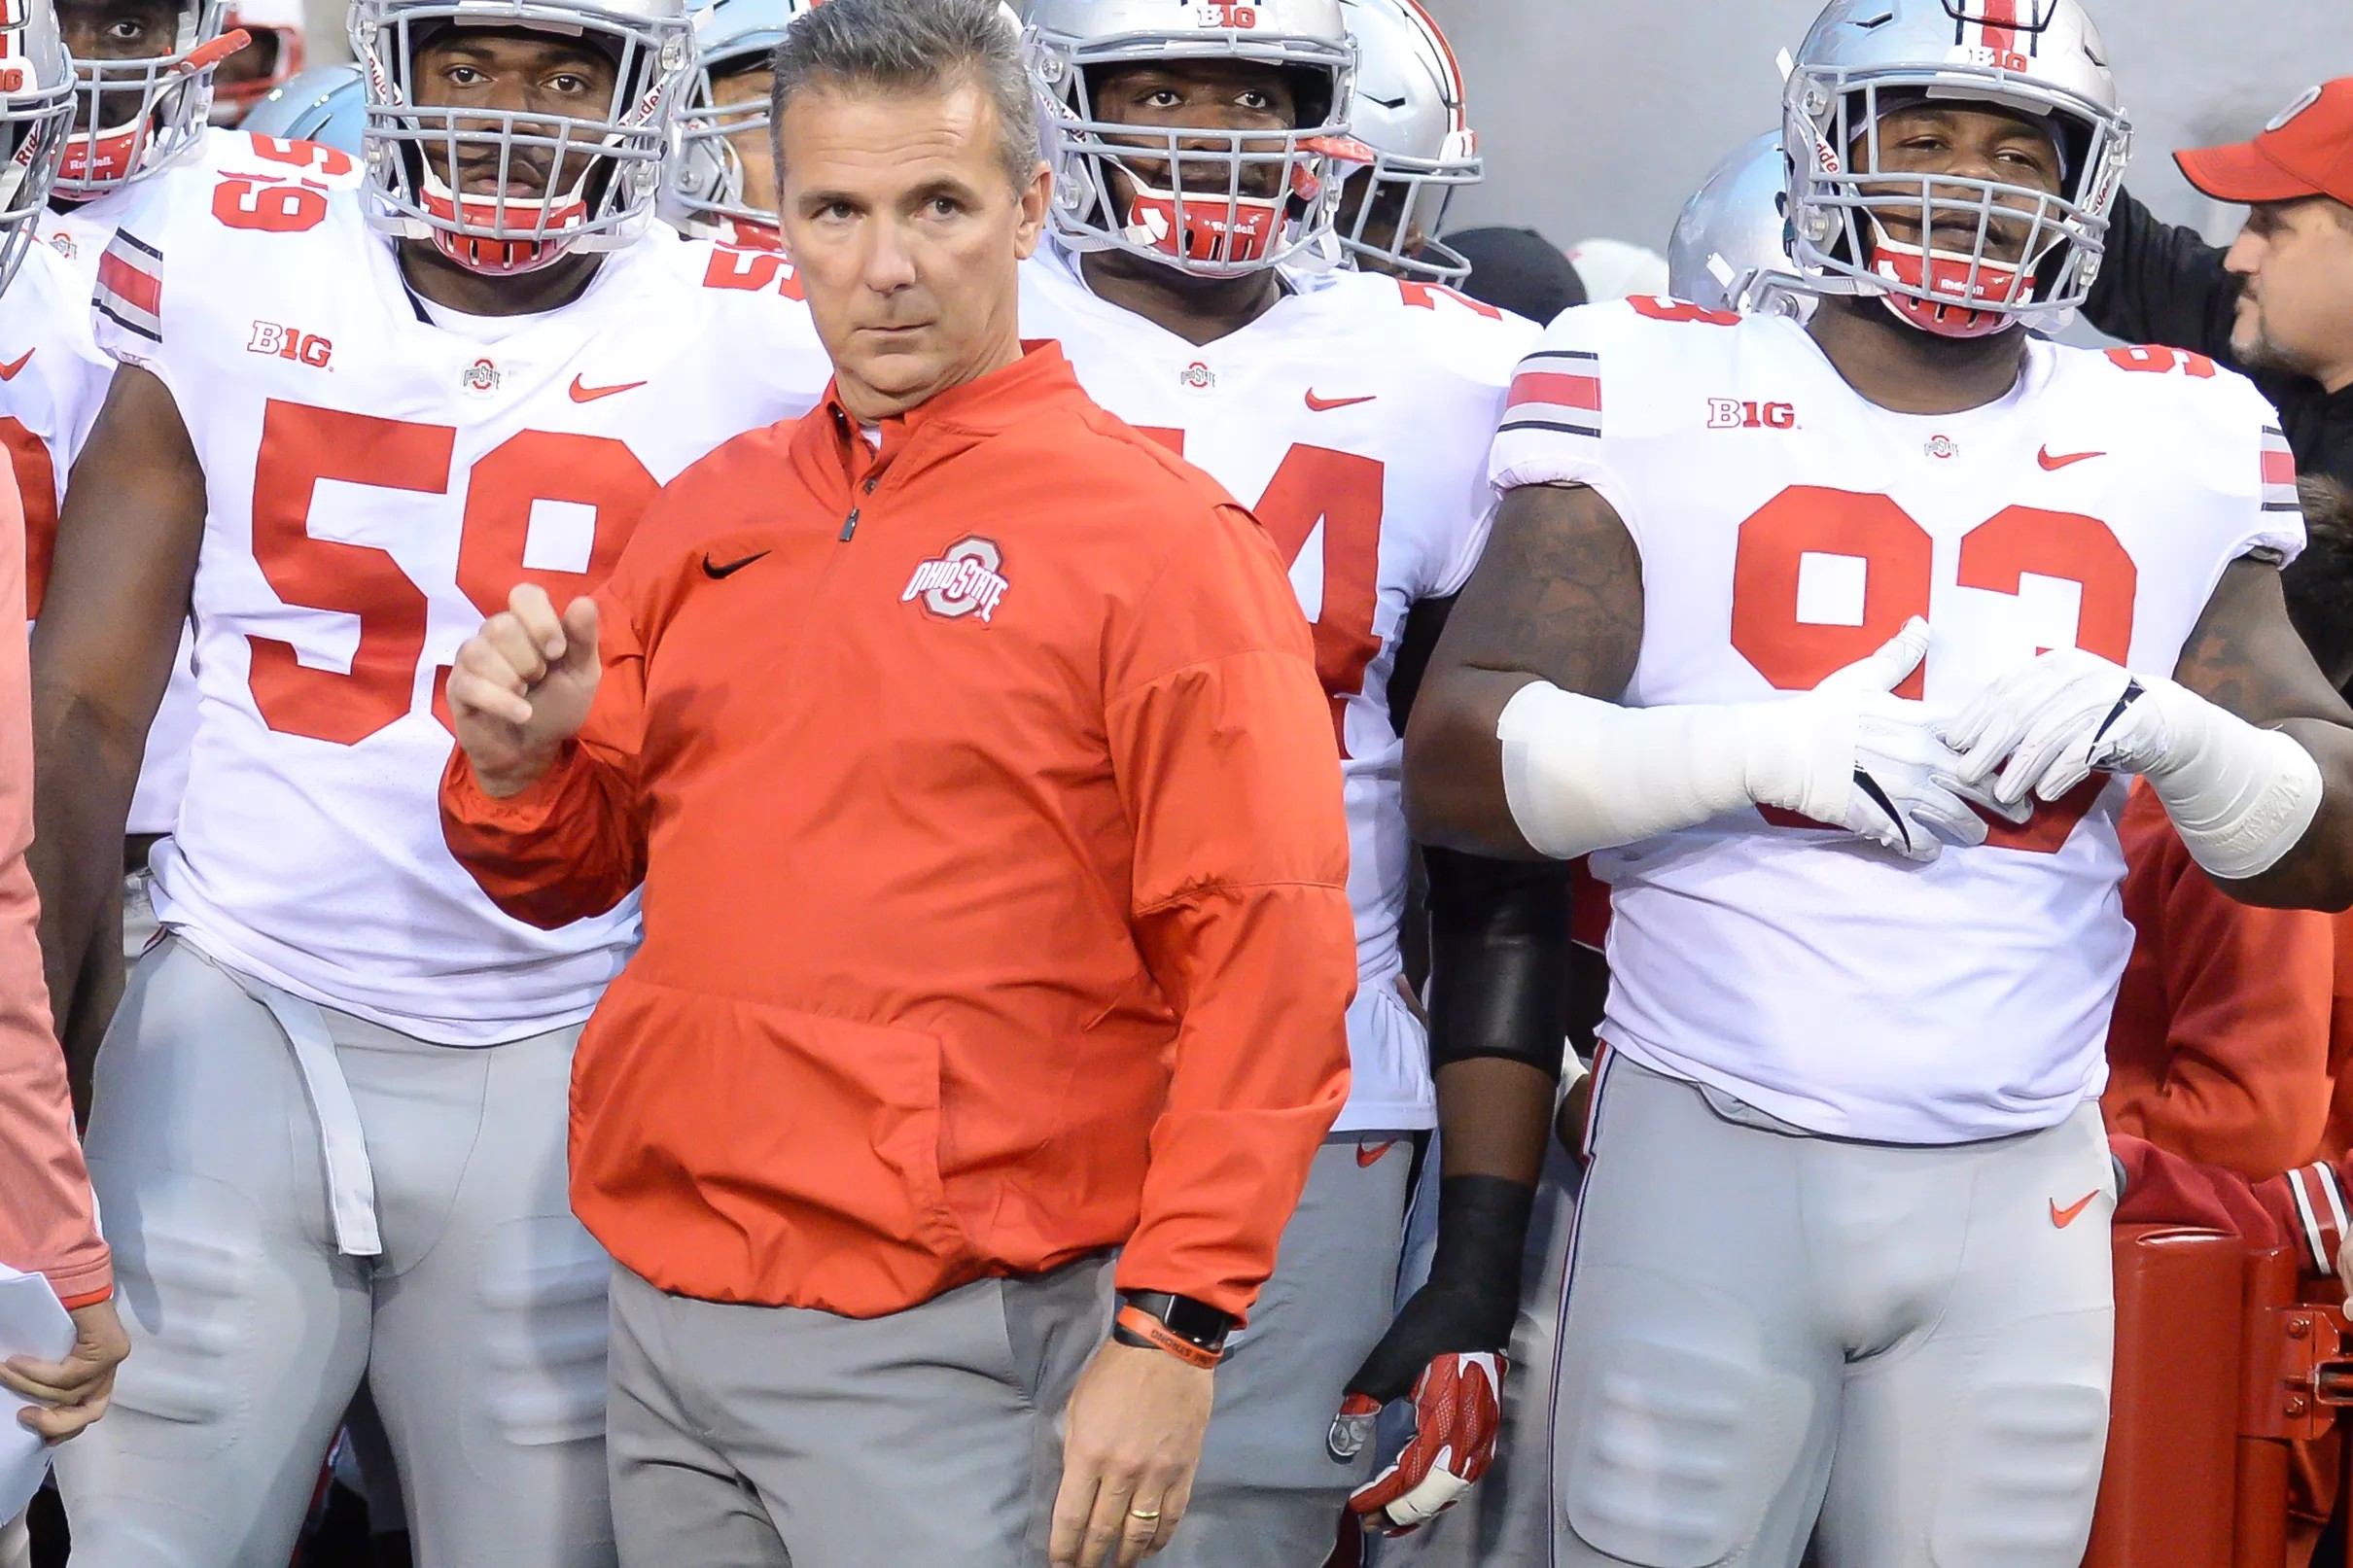 New bowl projections point to Ohio State in the College Football Playoff